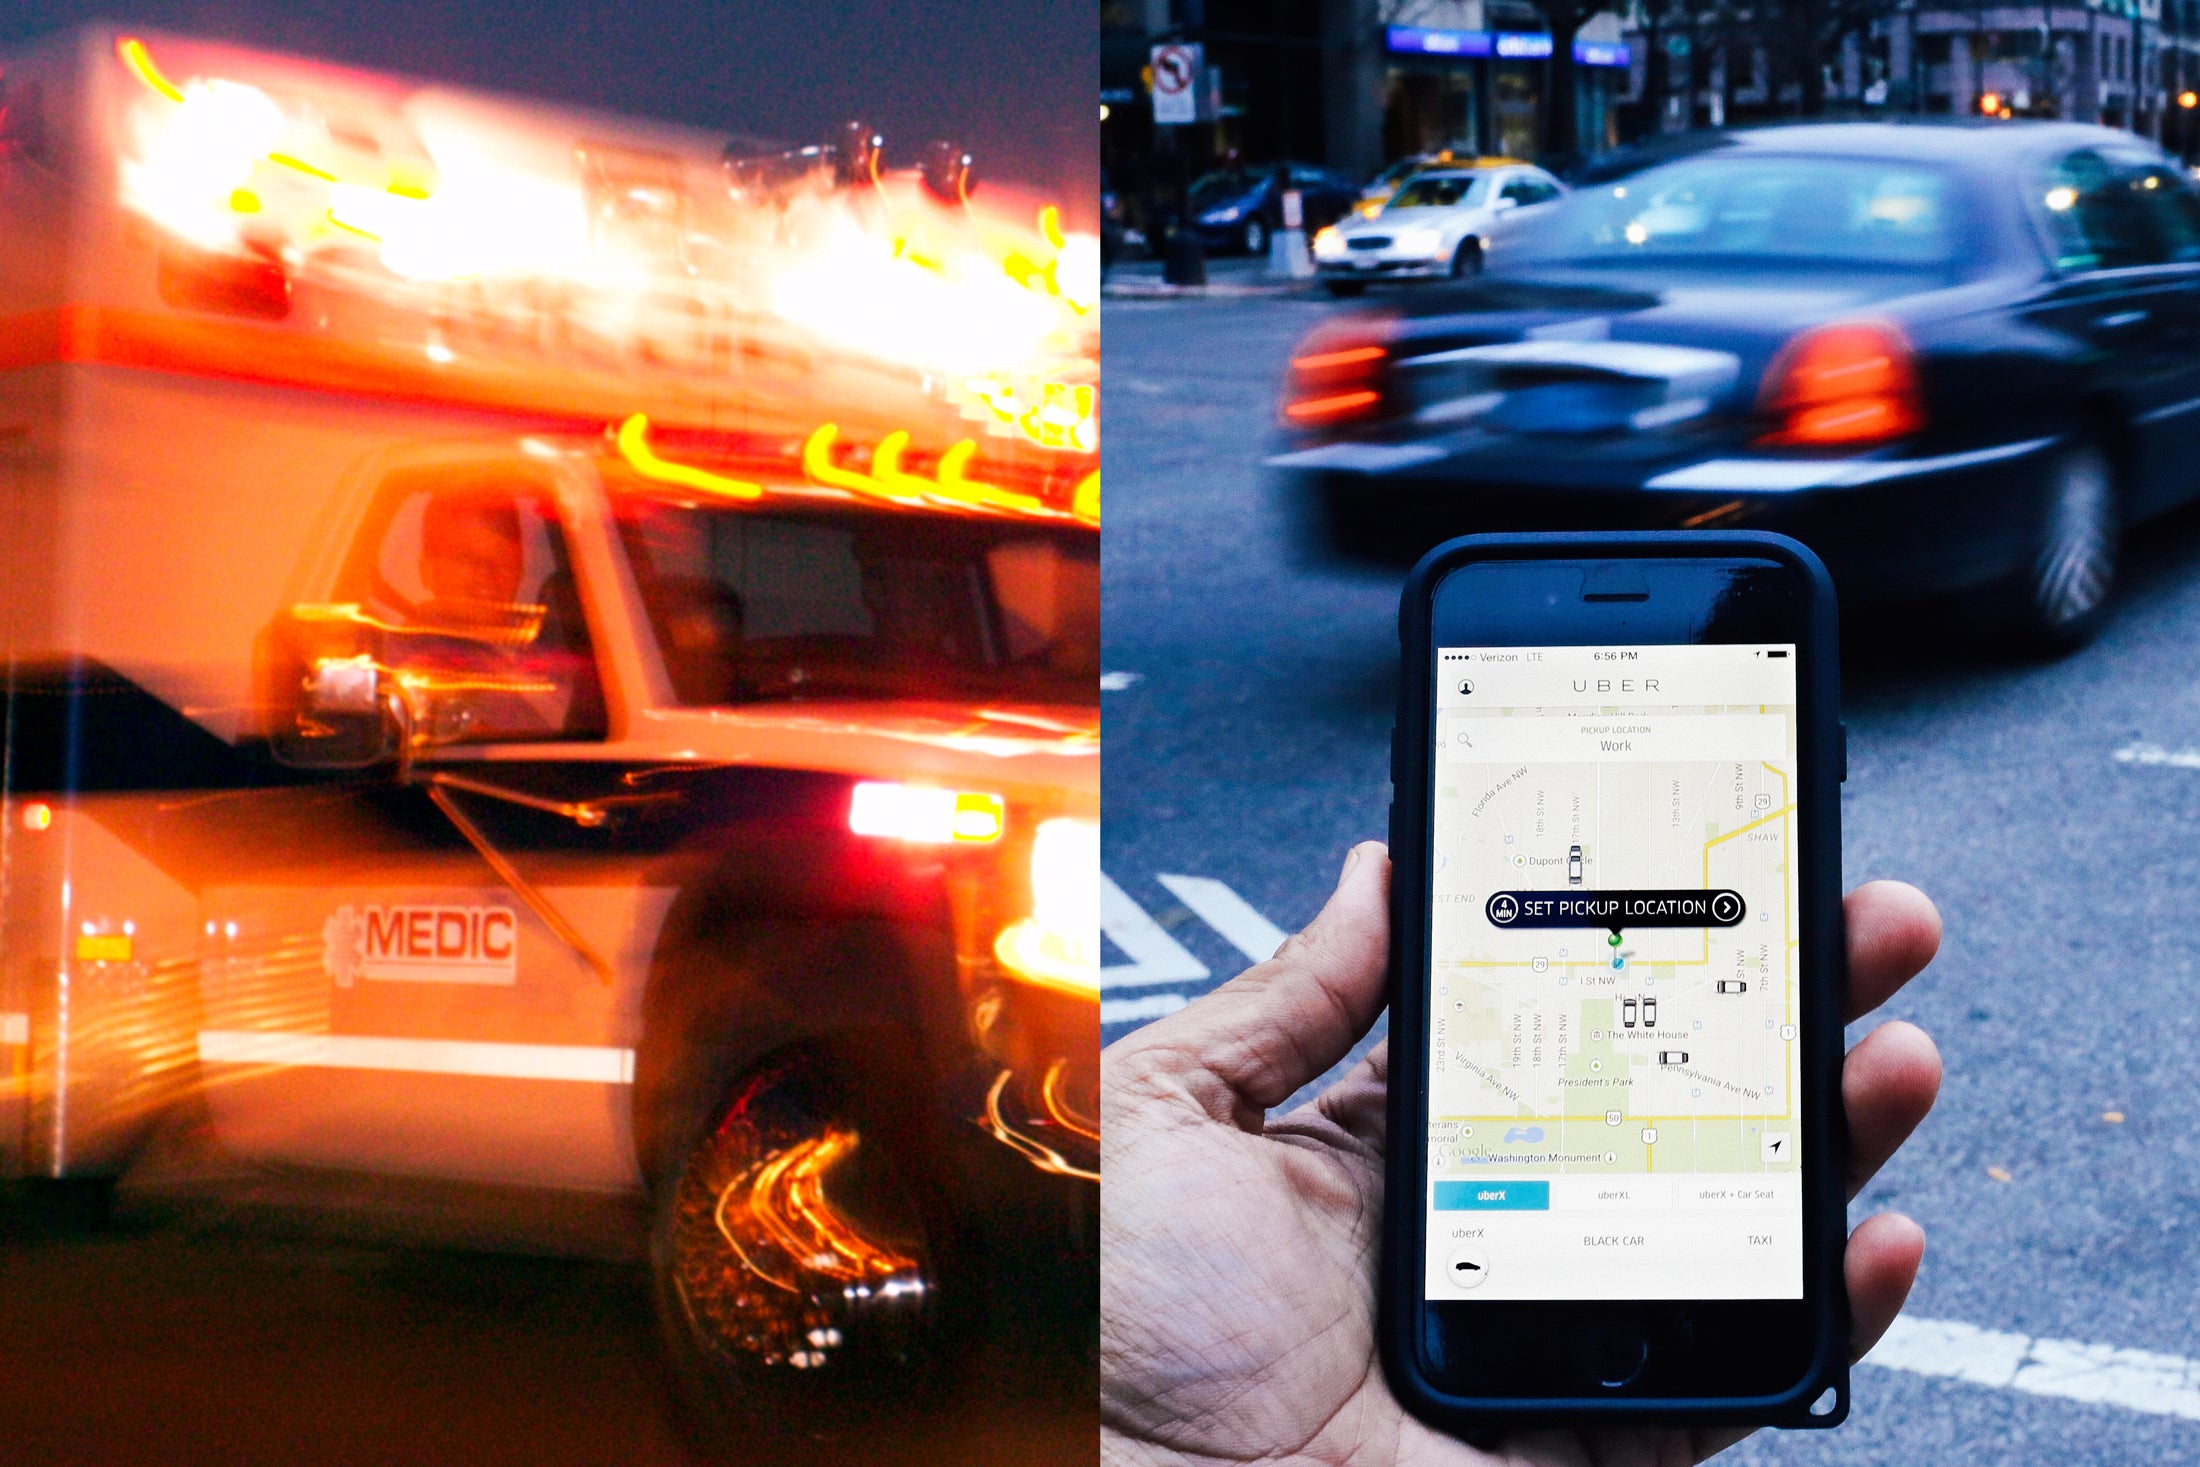 At left, an ambulance. At right, a hand holds a phone with an open Uber app.